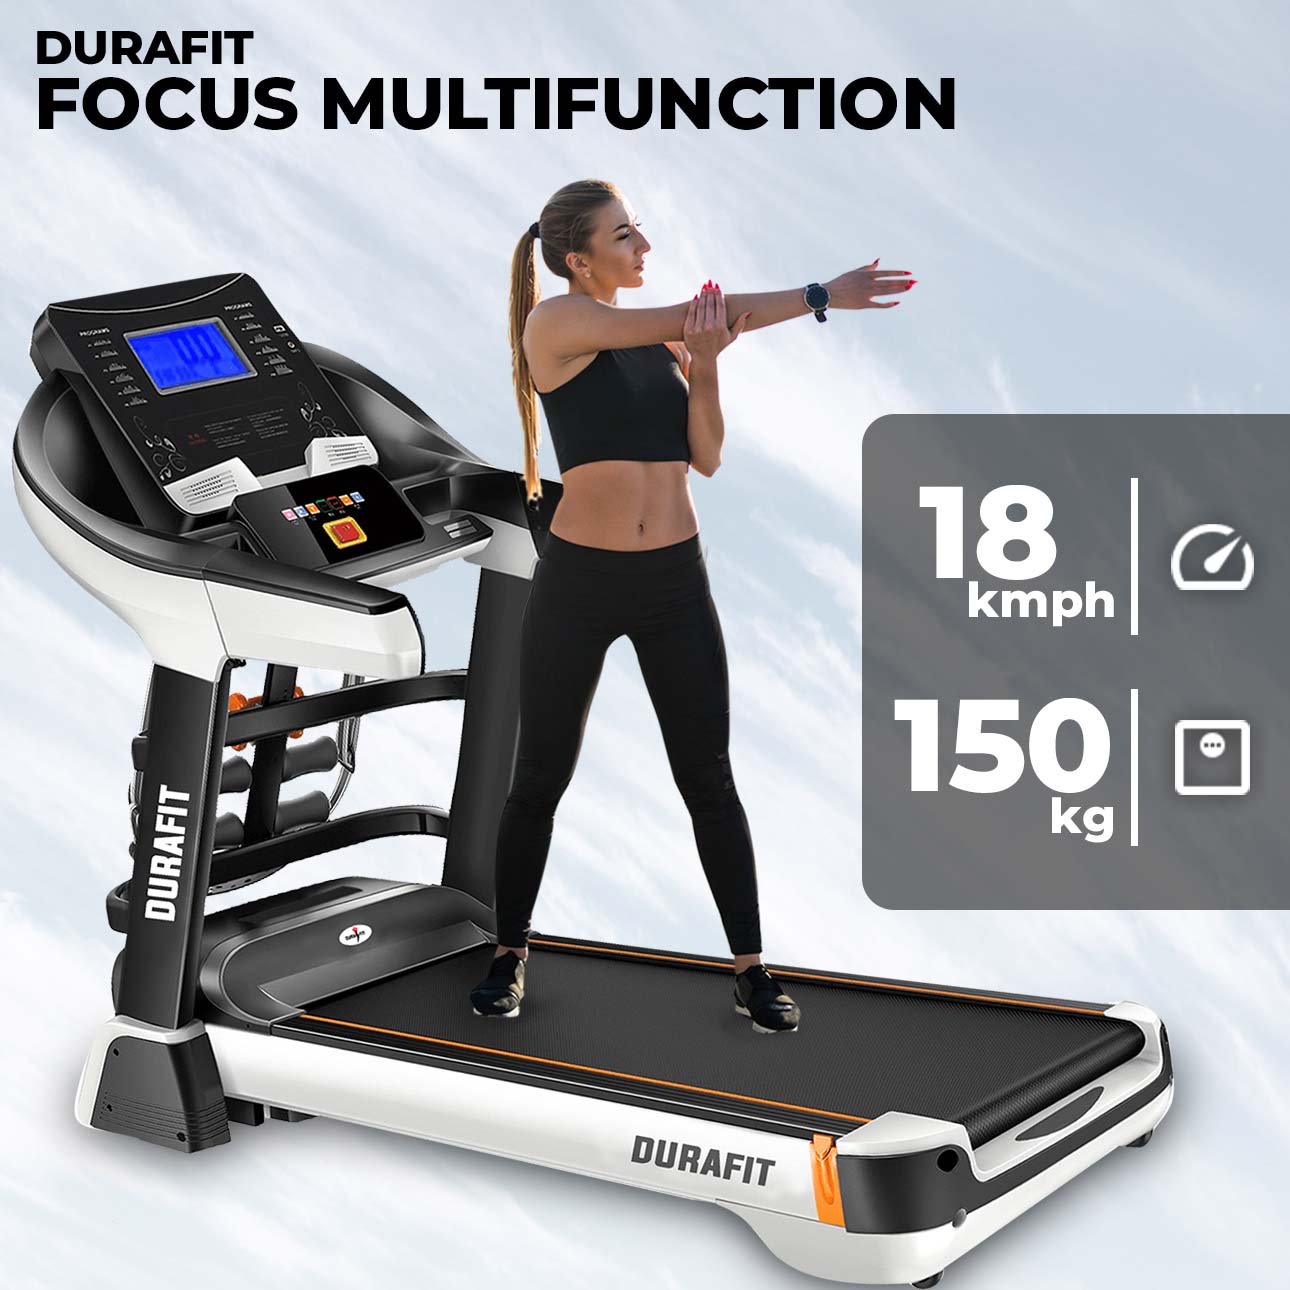 Durafit Focus Multifunction Treadmill with 150kg Max user weight